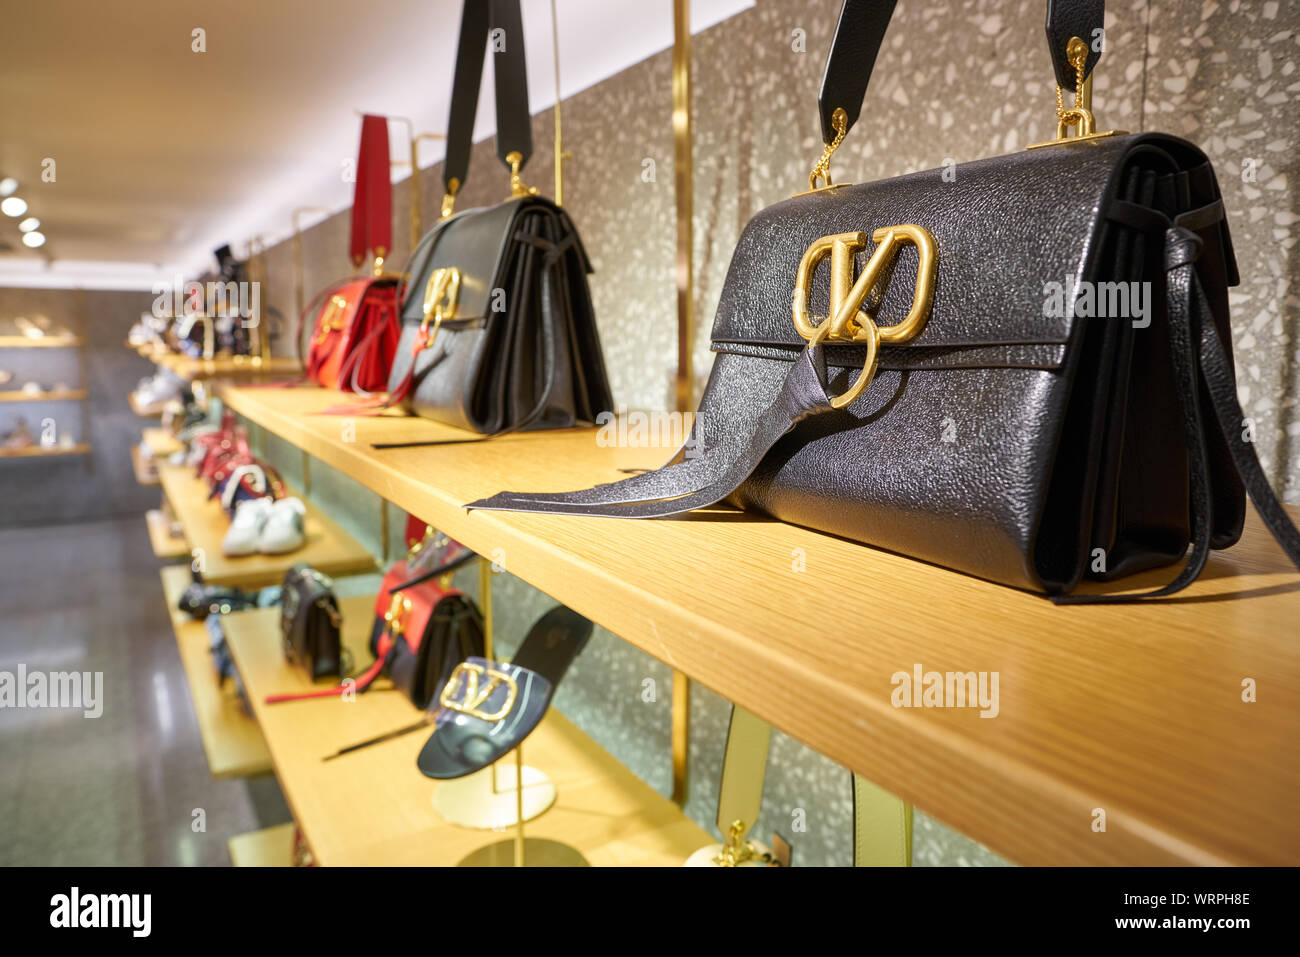 BAG ON DISPLAY AT VALENTINO FASHION BOUTIQUE Stock Photo - Alamy